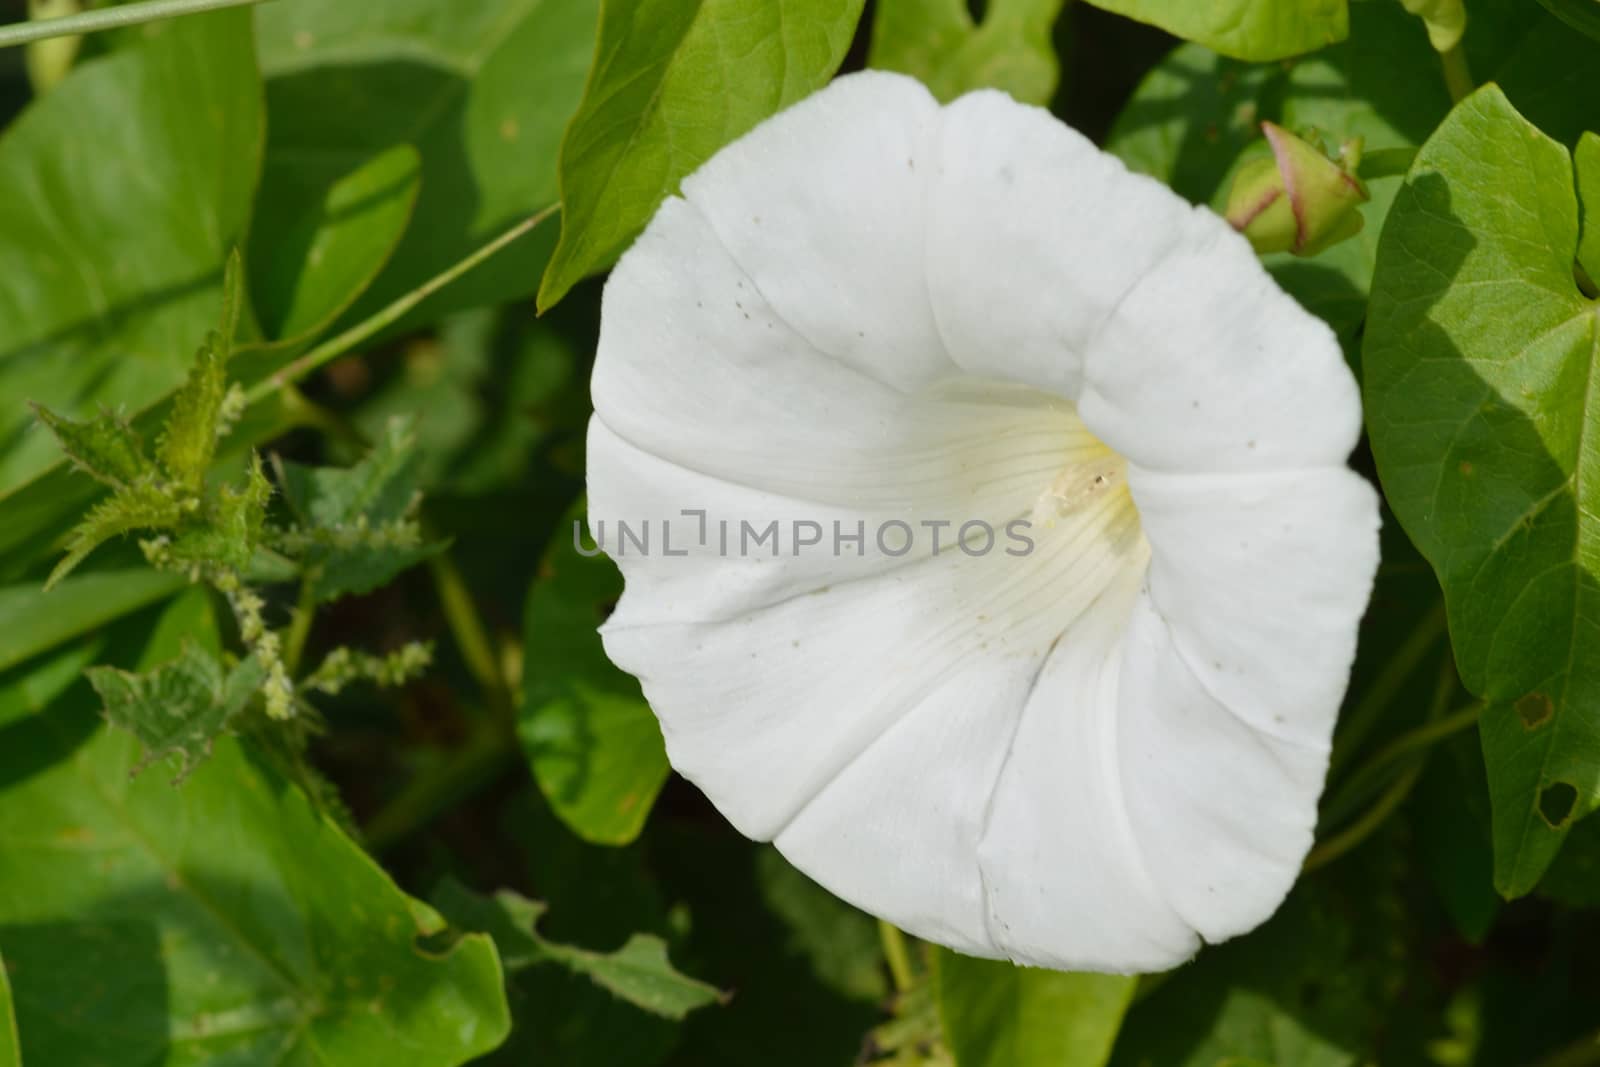 Bindweed flower in close up by pauws99